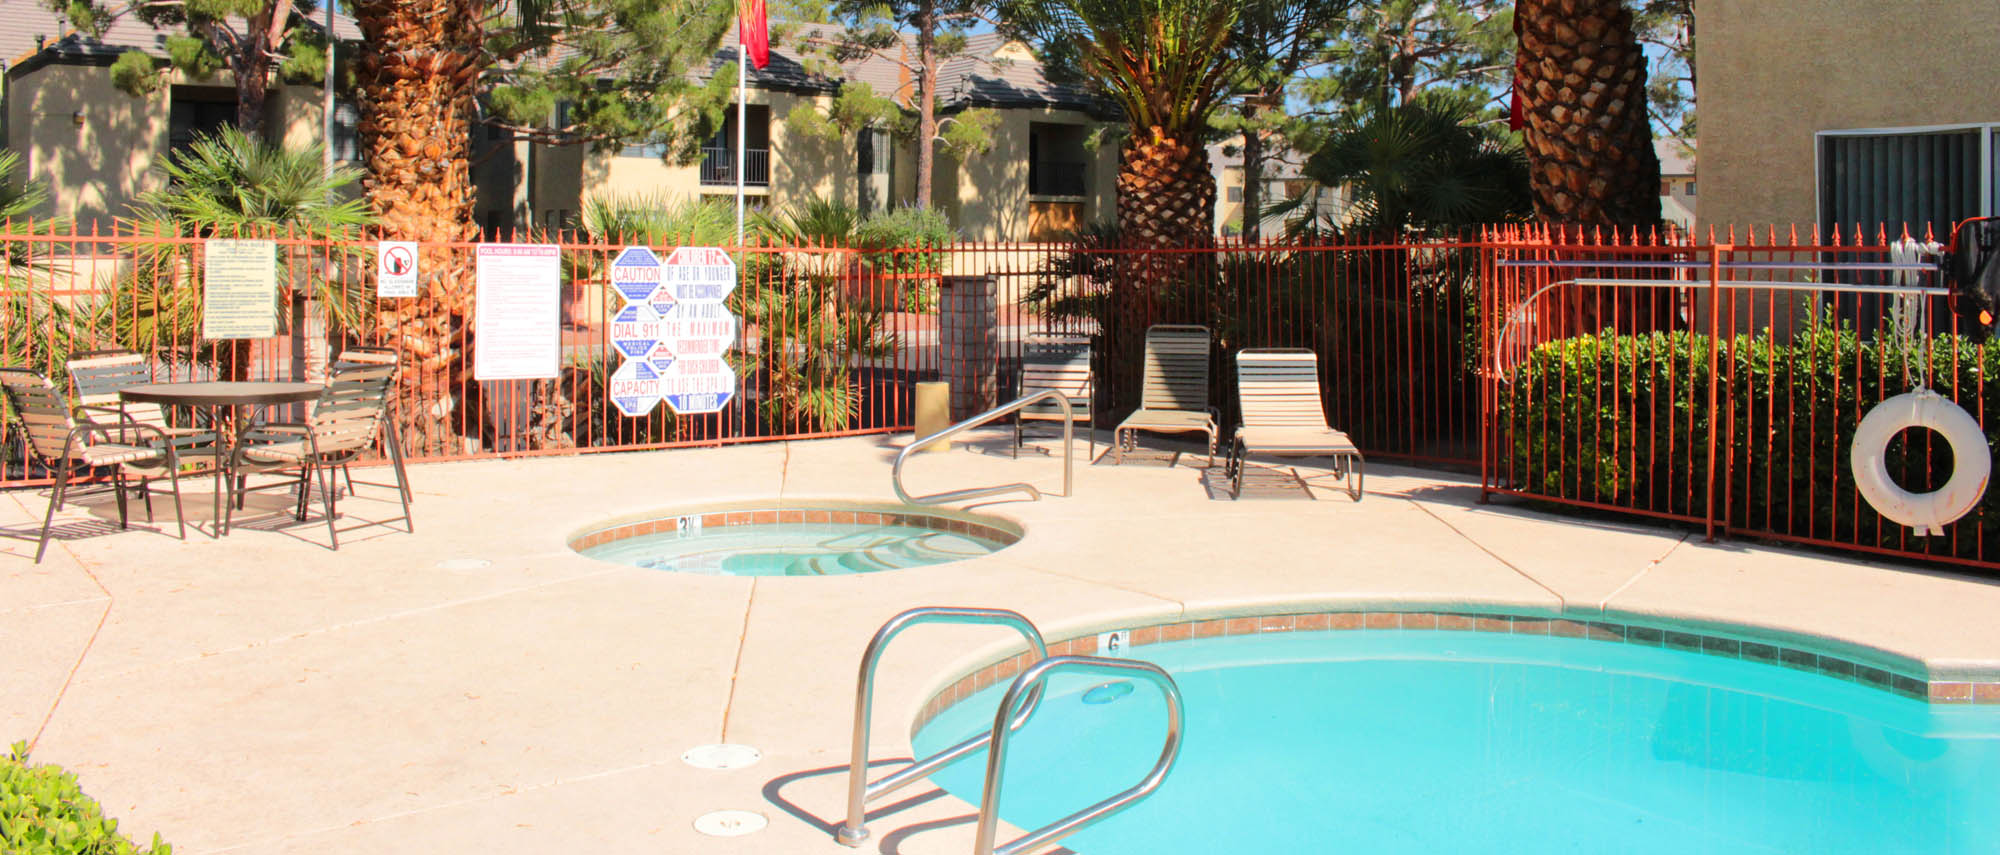 This image shows the another view of swimming pool in Bellevue Apartments